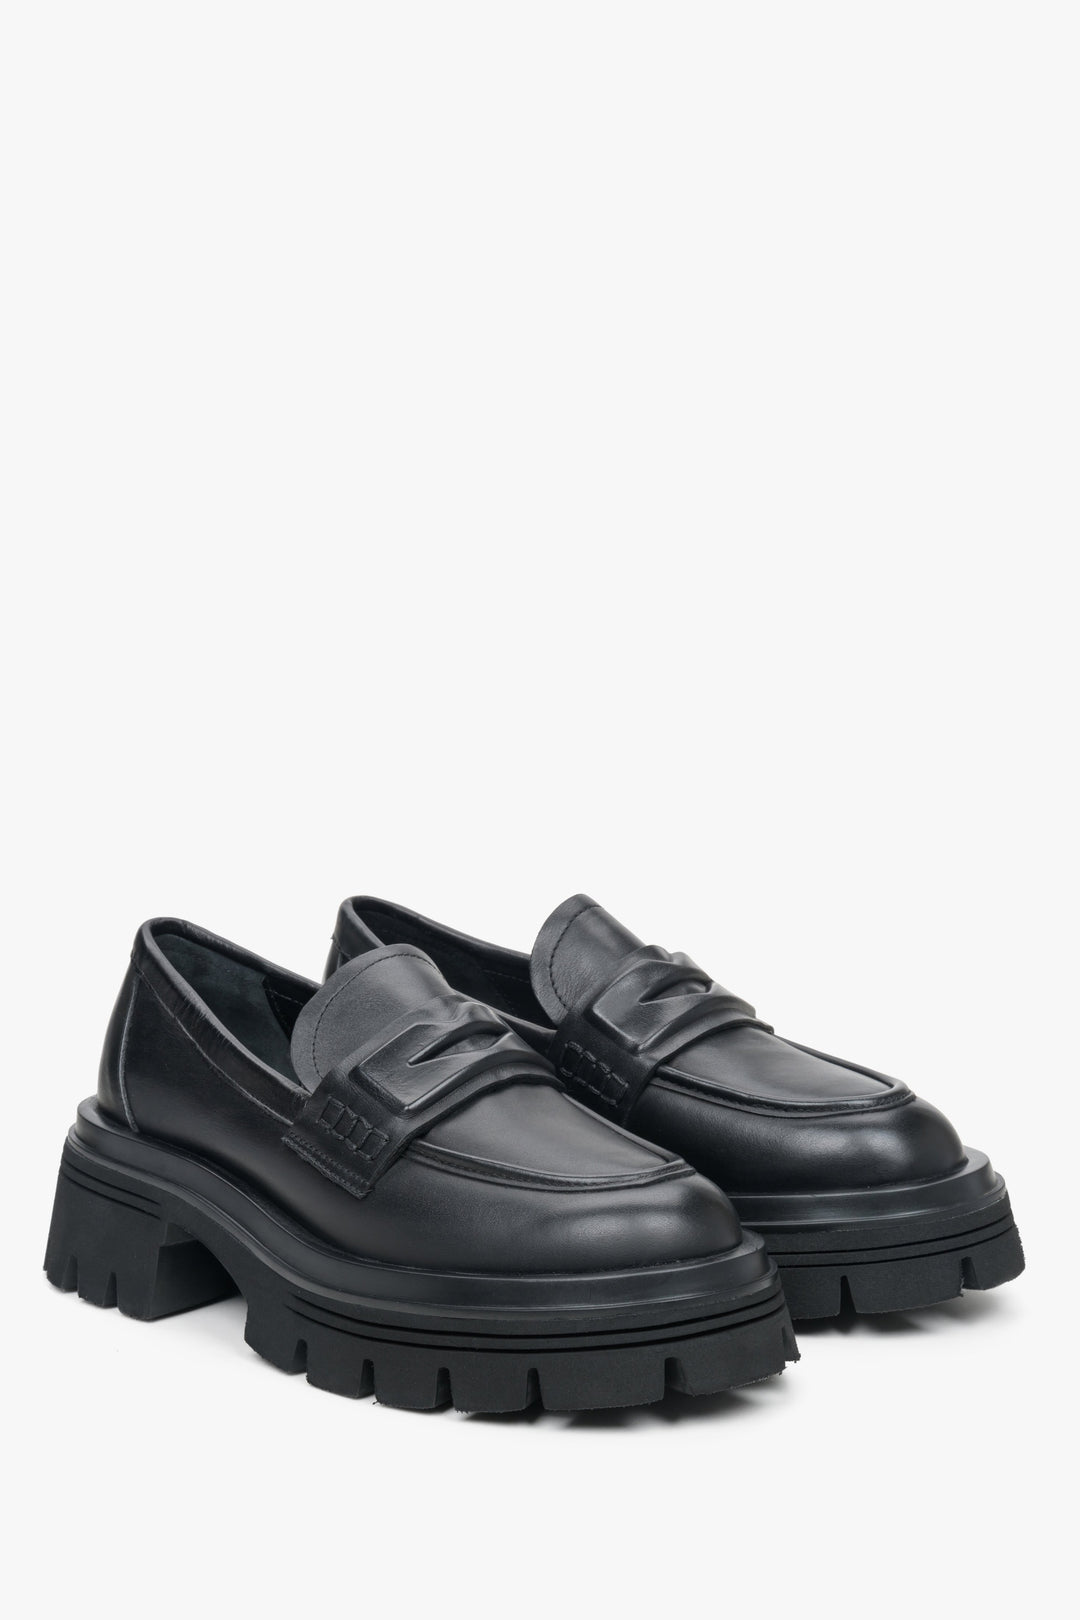 Women's black leather loafers by Estro - close-up on the toe cap.